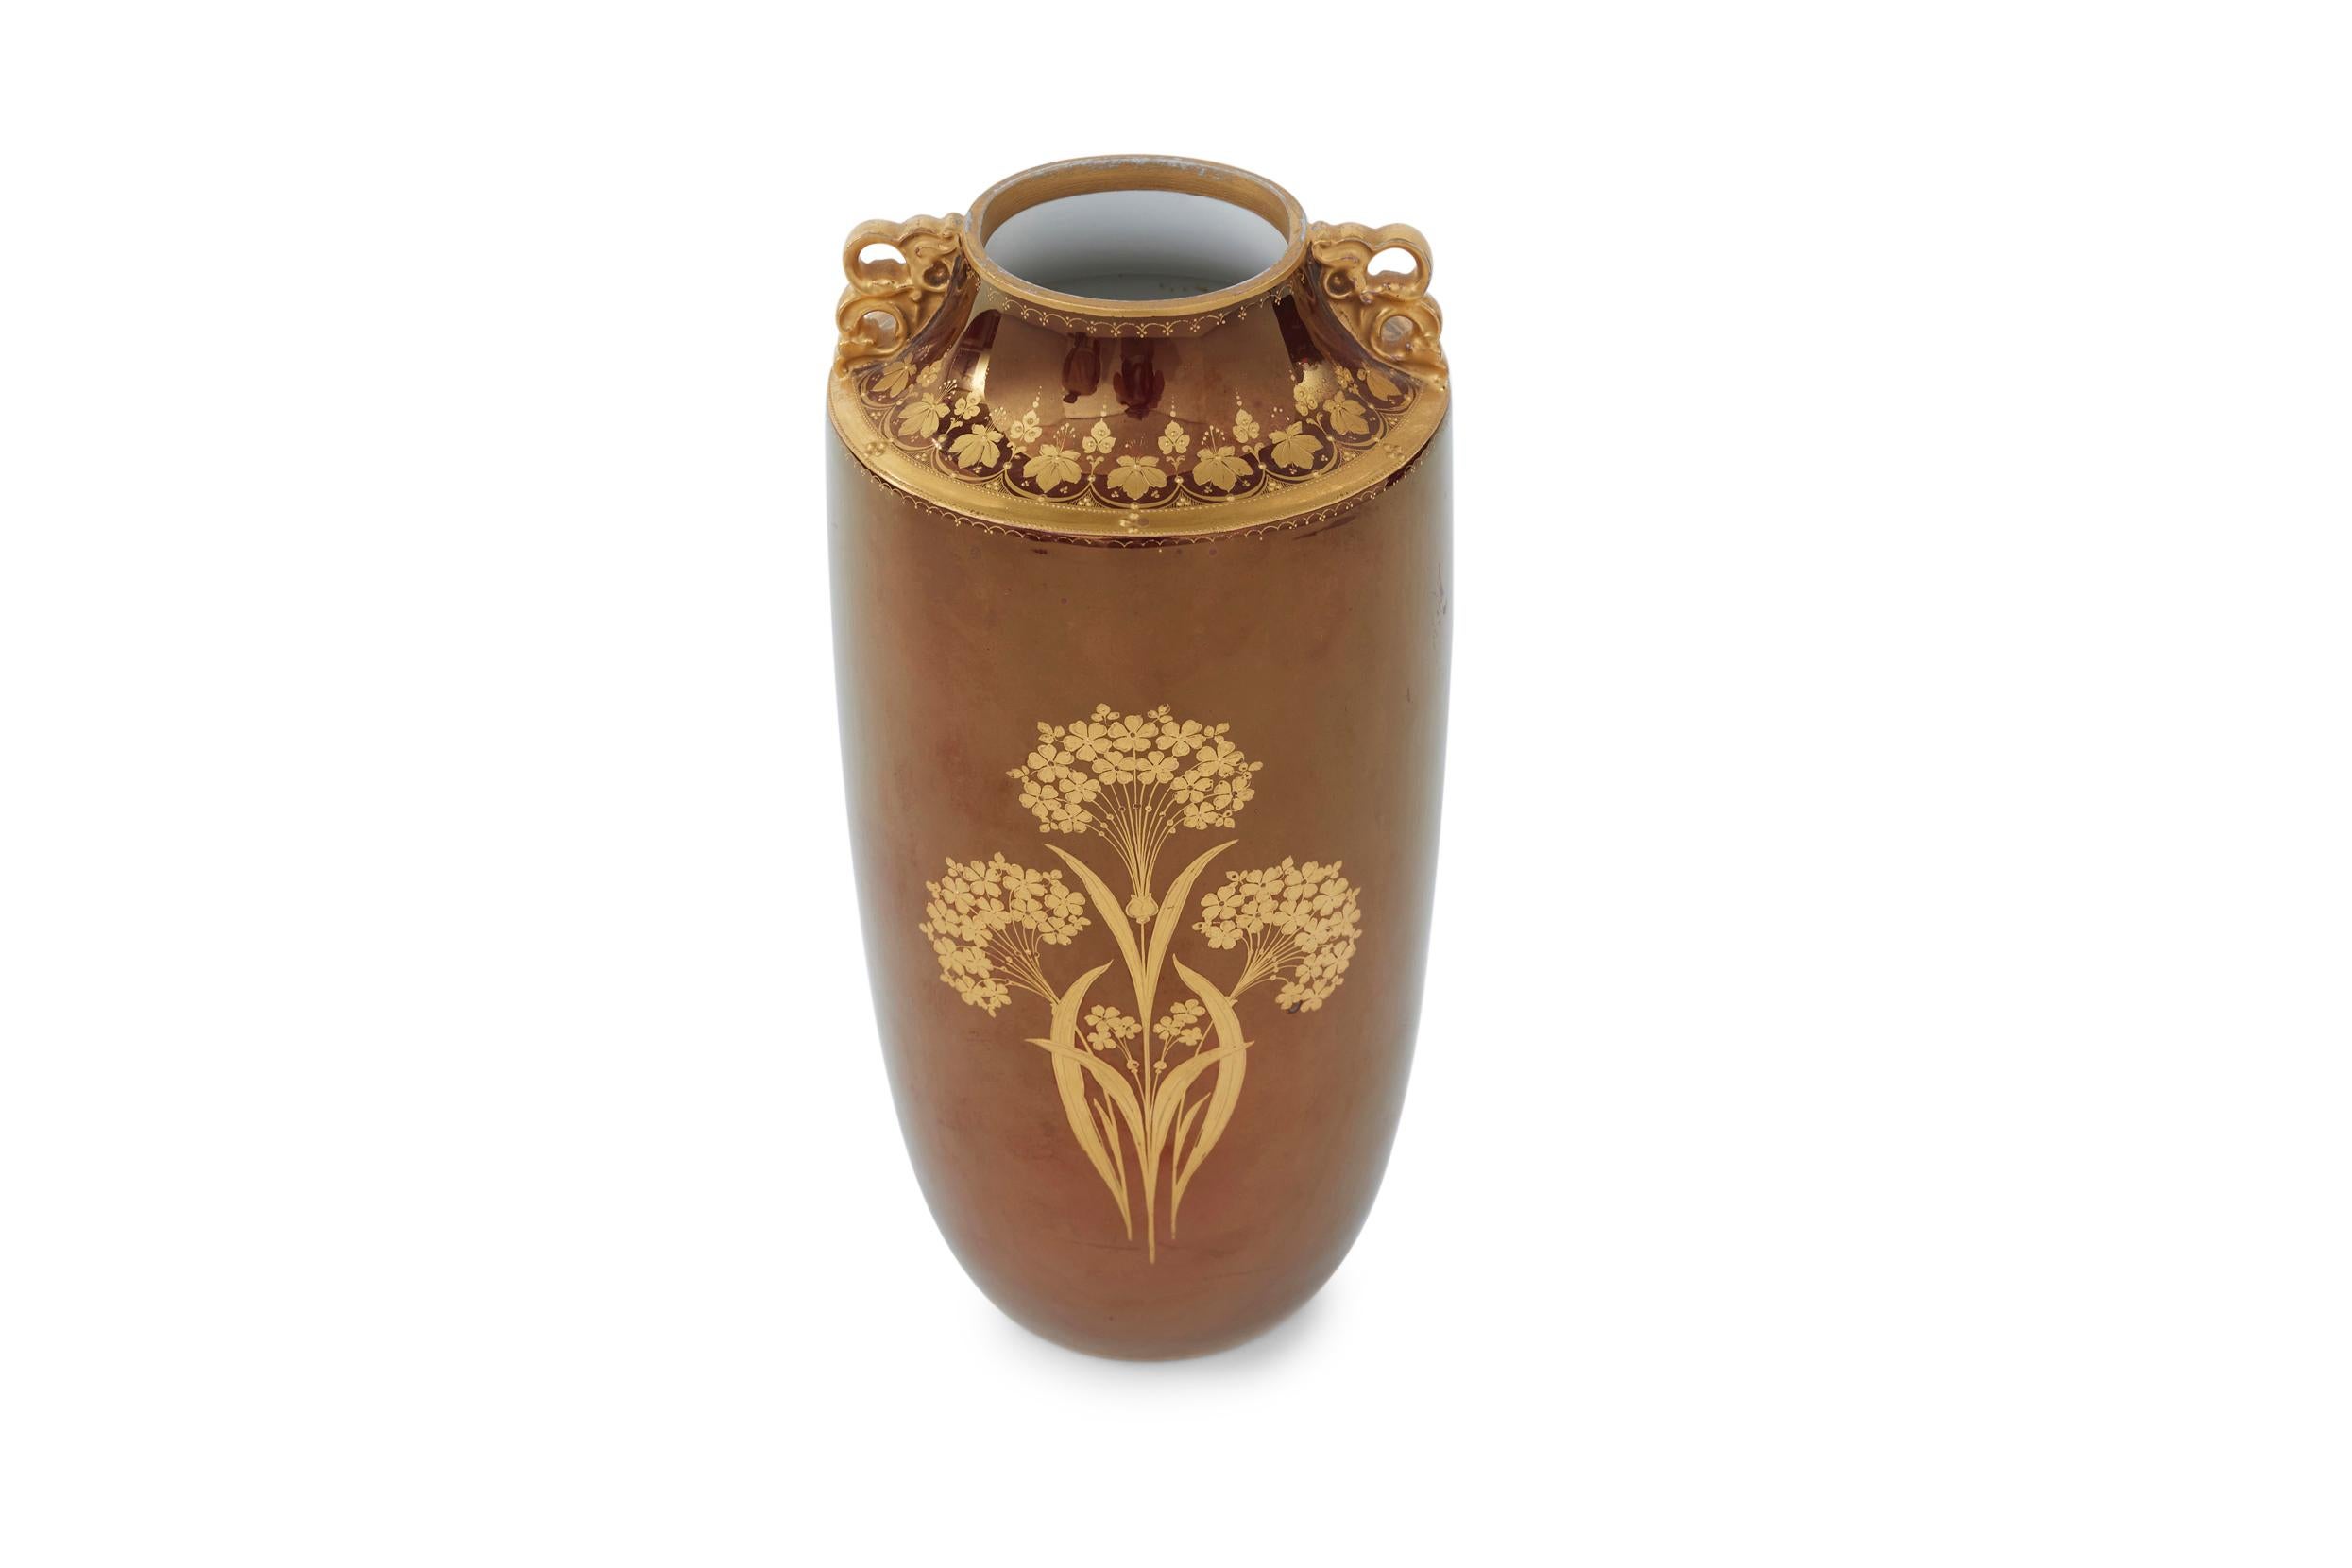 Royal Vienna gilt gold porcelain decorative vase / piece with exterior design details. The vase / piece was painted by Wagner Finely, ackermann & Frit Gesetzlich Geschutzt trademark, Retailed by Bros new york in the first half 20th century. The